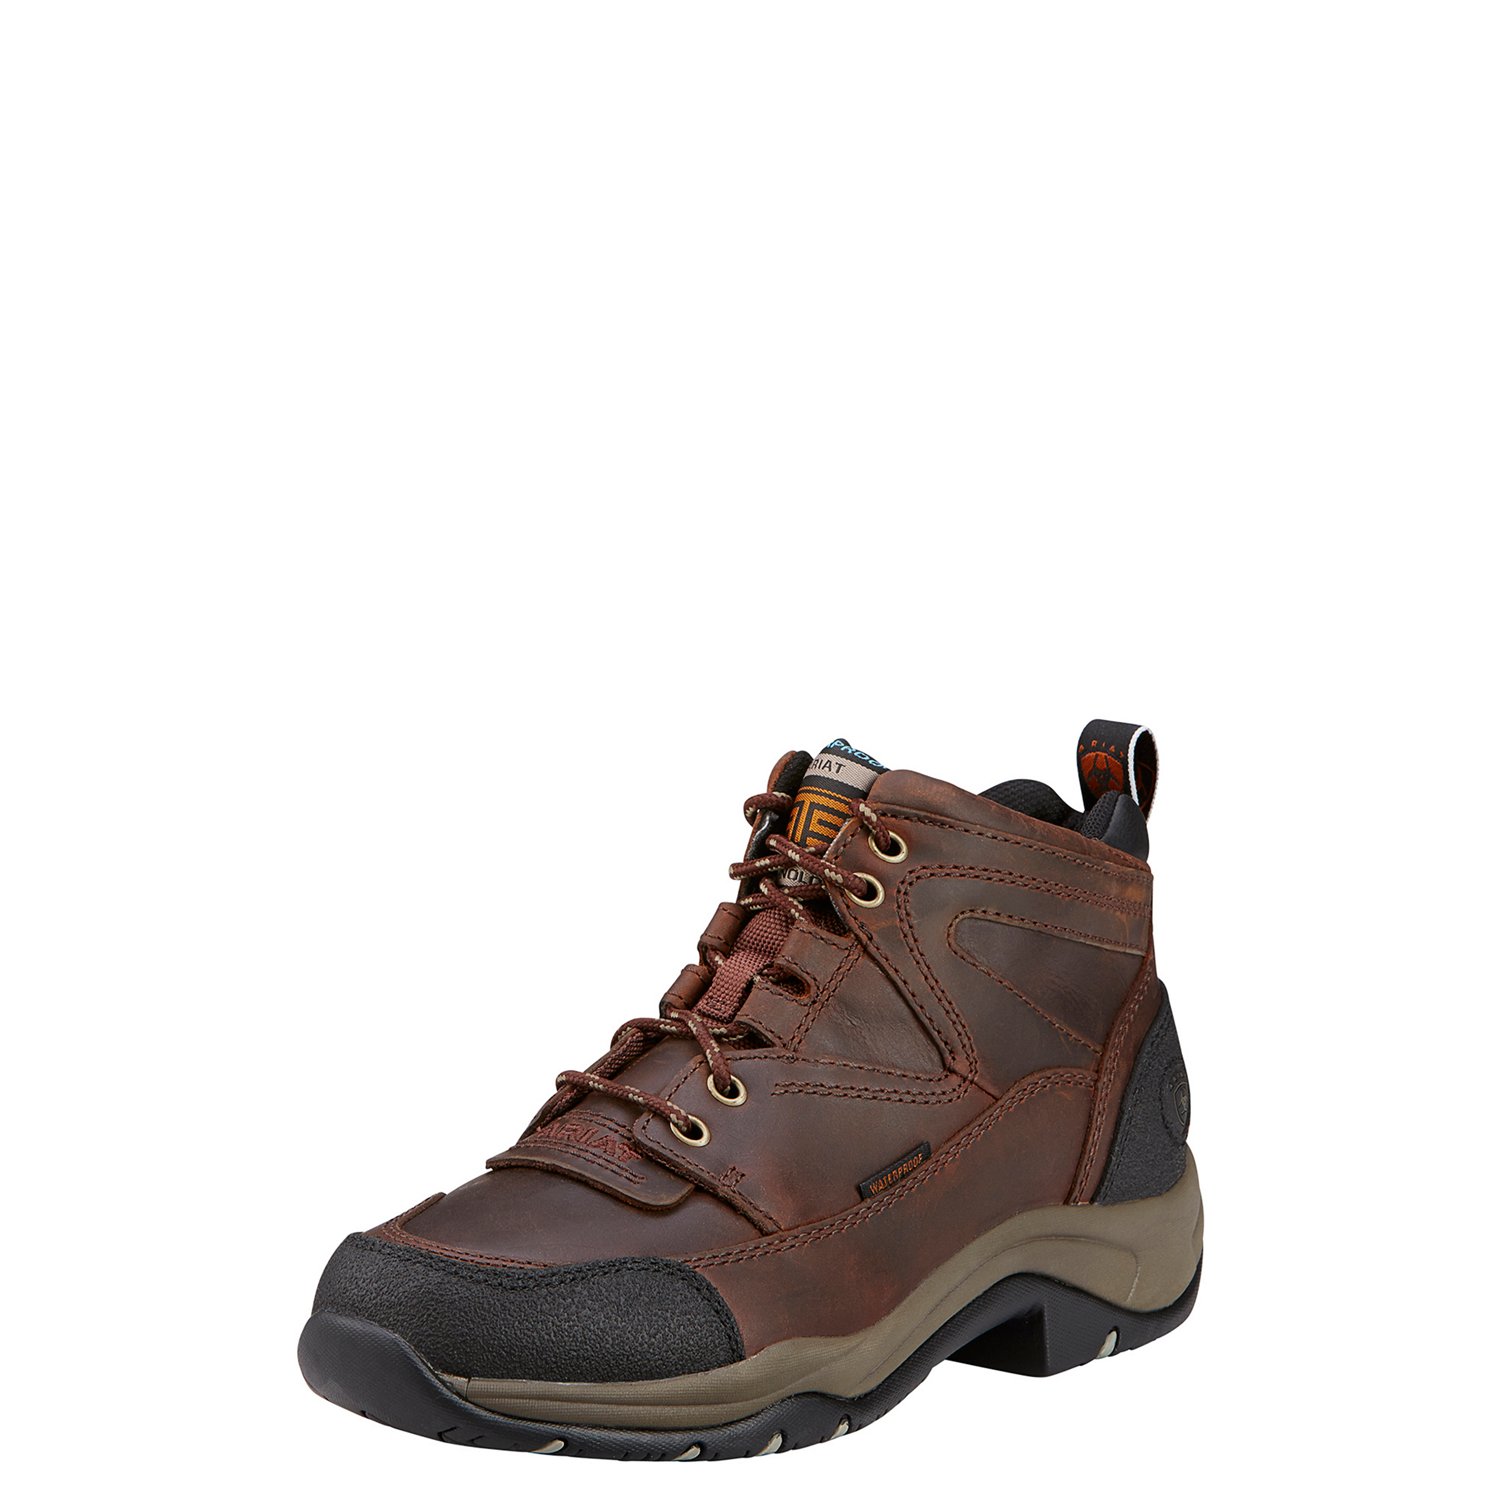 Ariat Women's Terrain Waterproof Boots | Free Shipping at Academy